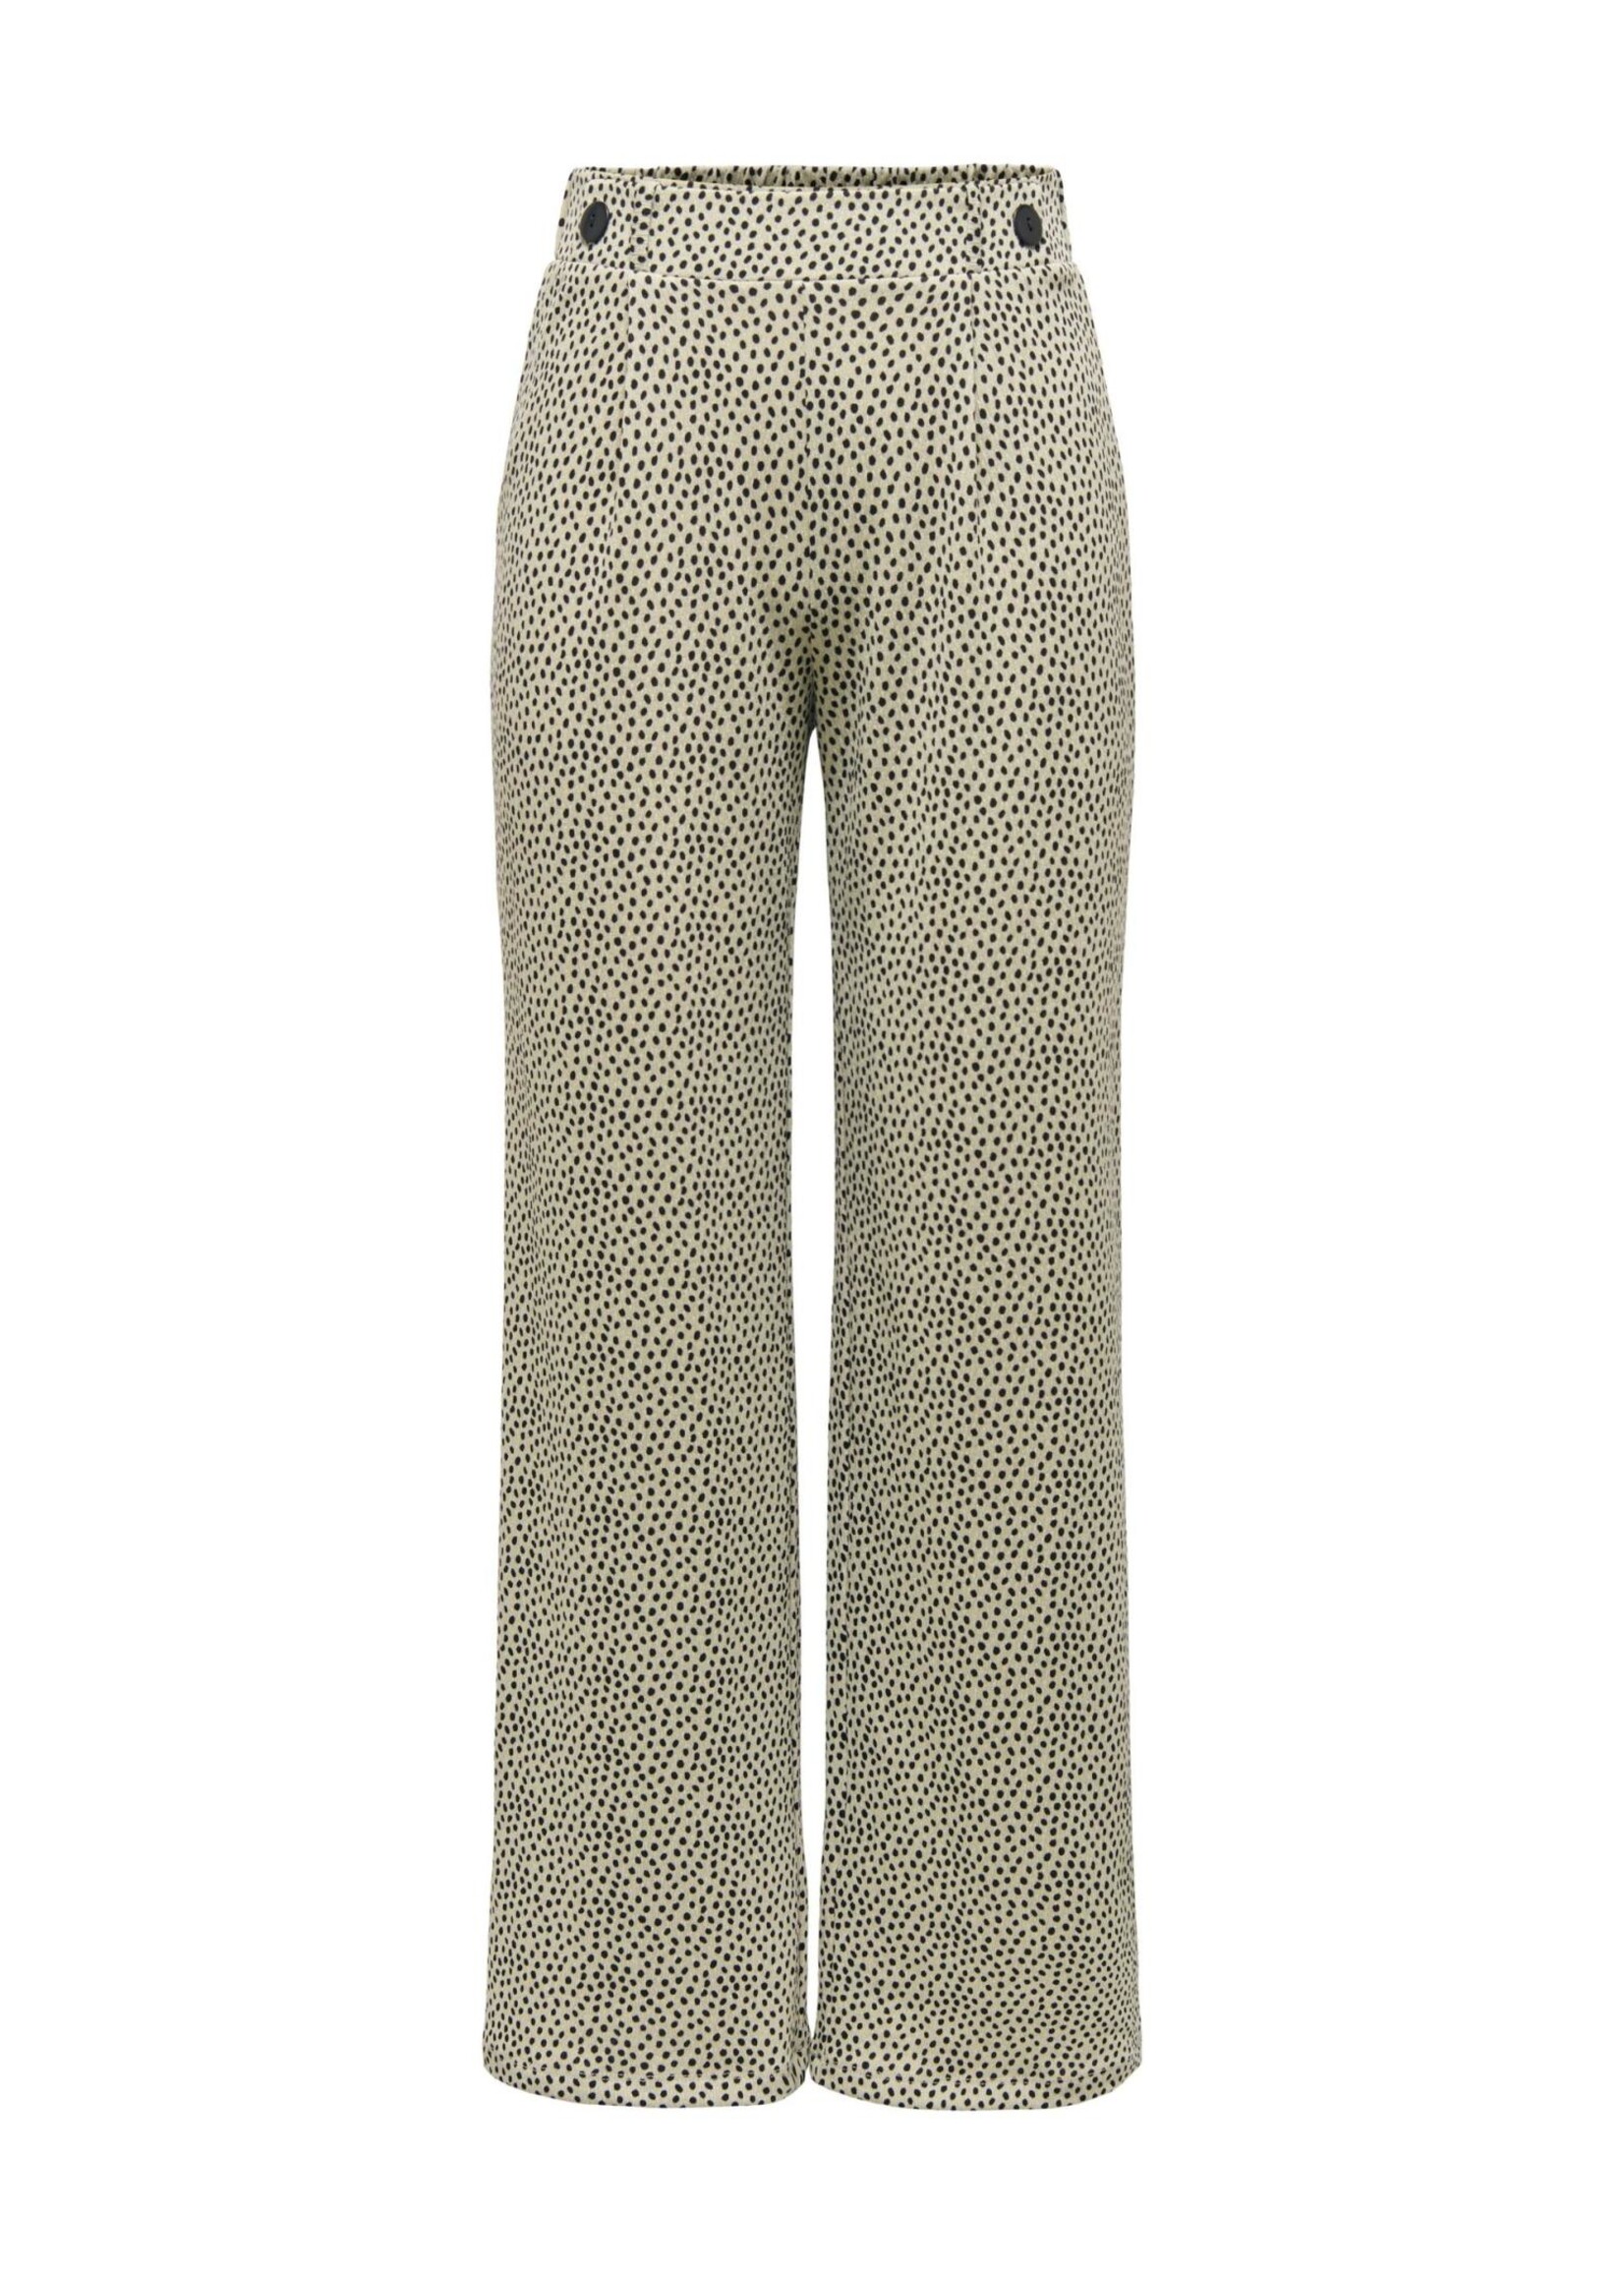 ONLY PAULINE WIDE PANT JRS moss gray dot